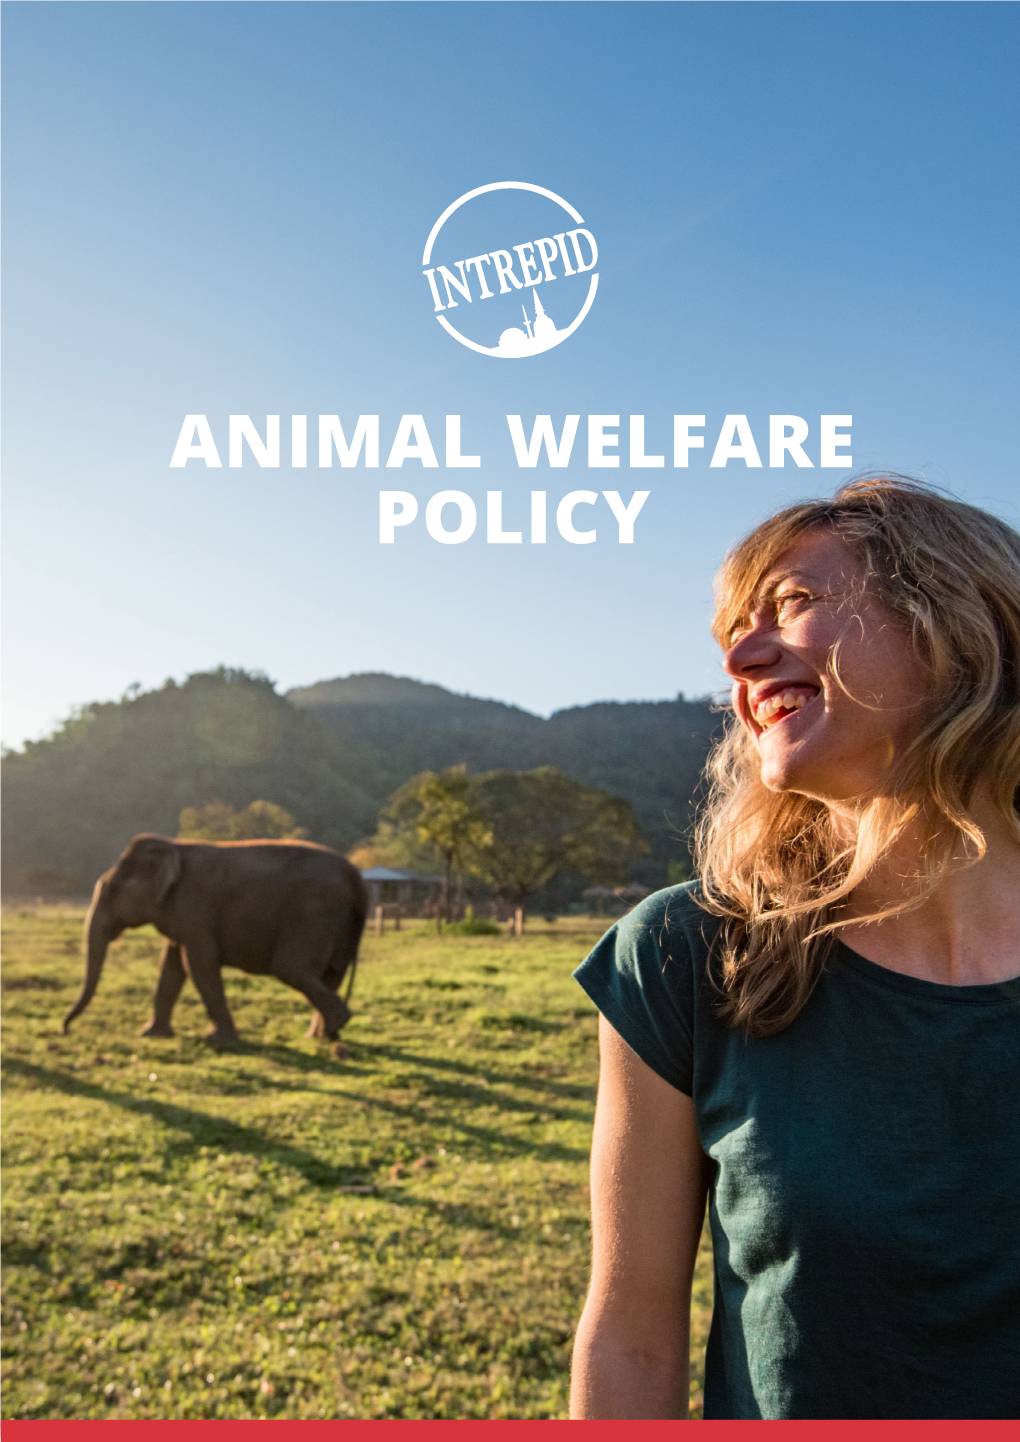 Read Our Full Animal Welfare Policy